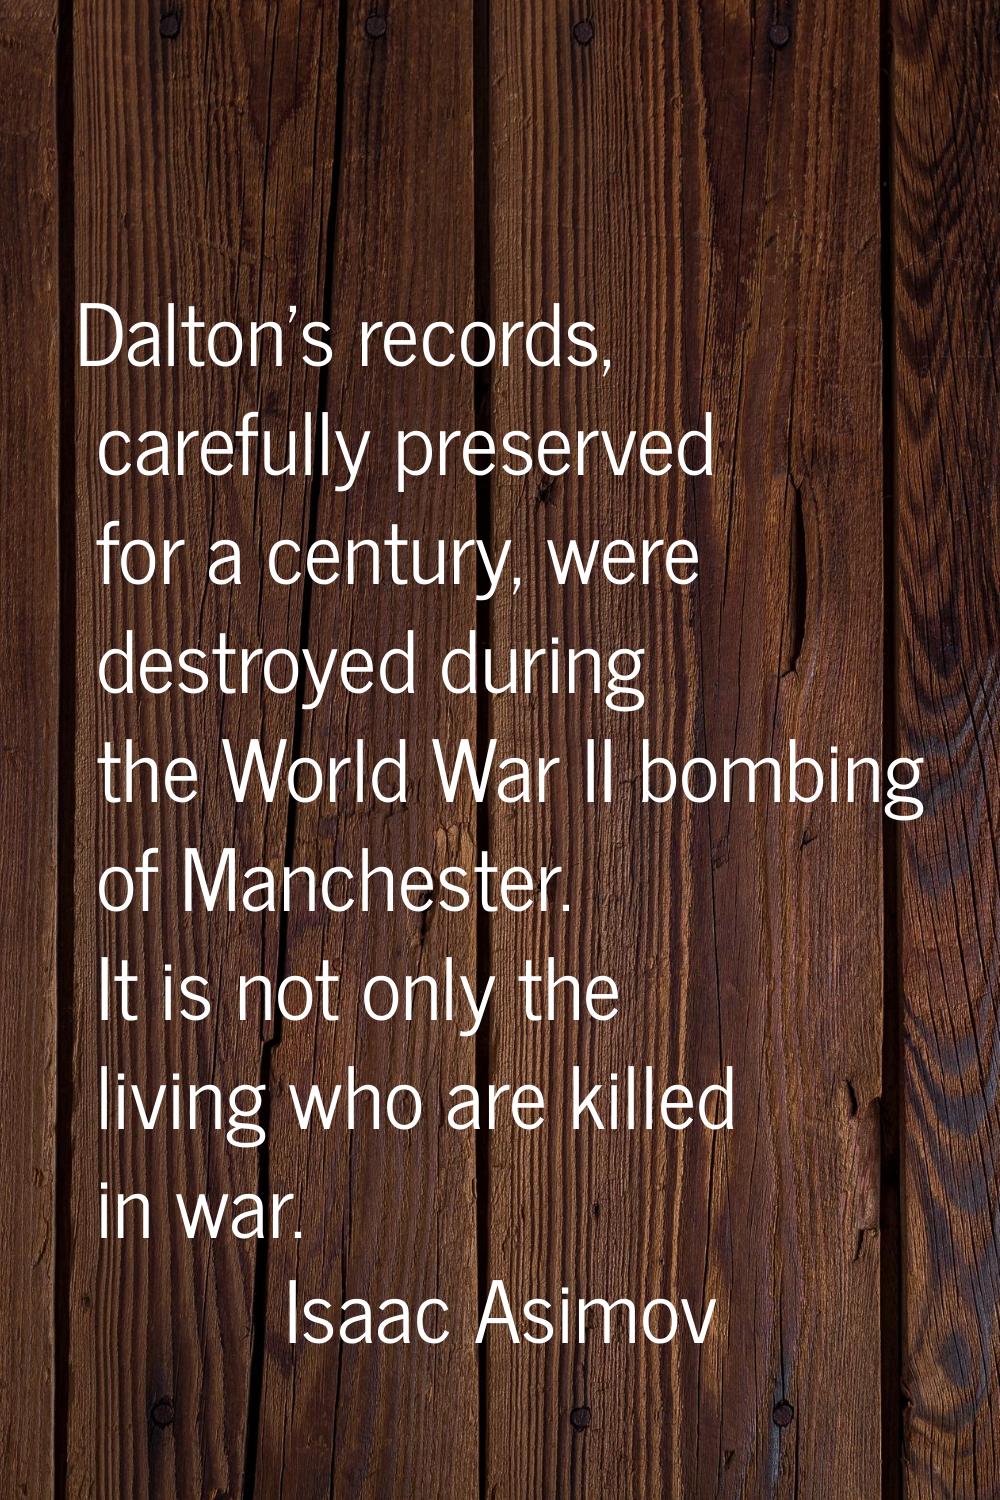 Dalton's records, carefully preserved for a century, were destroyed during the World War II bombing